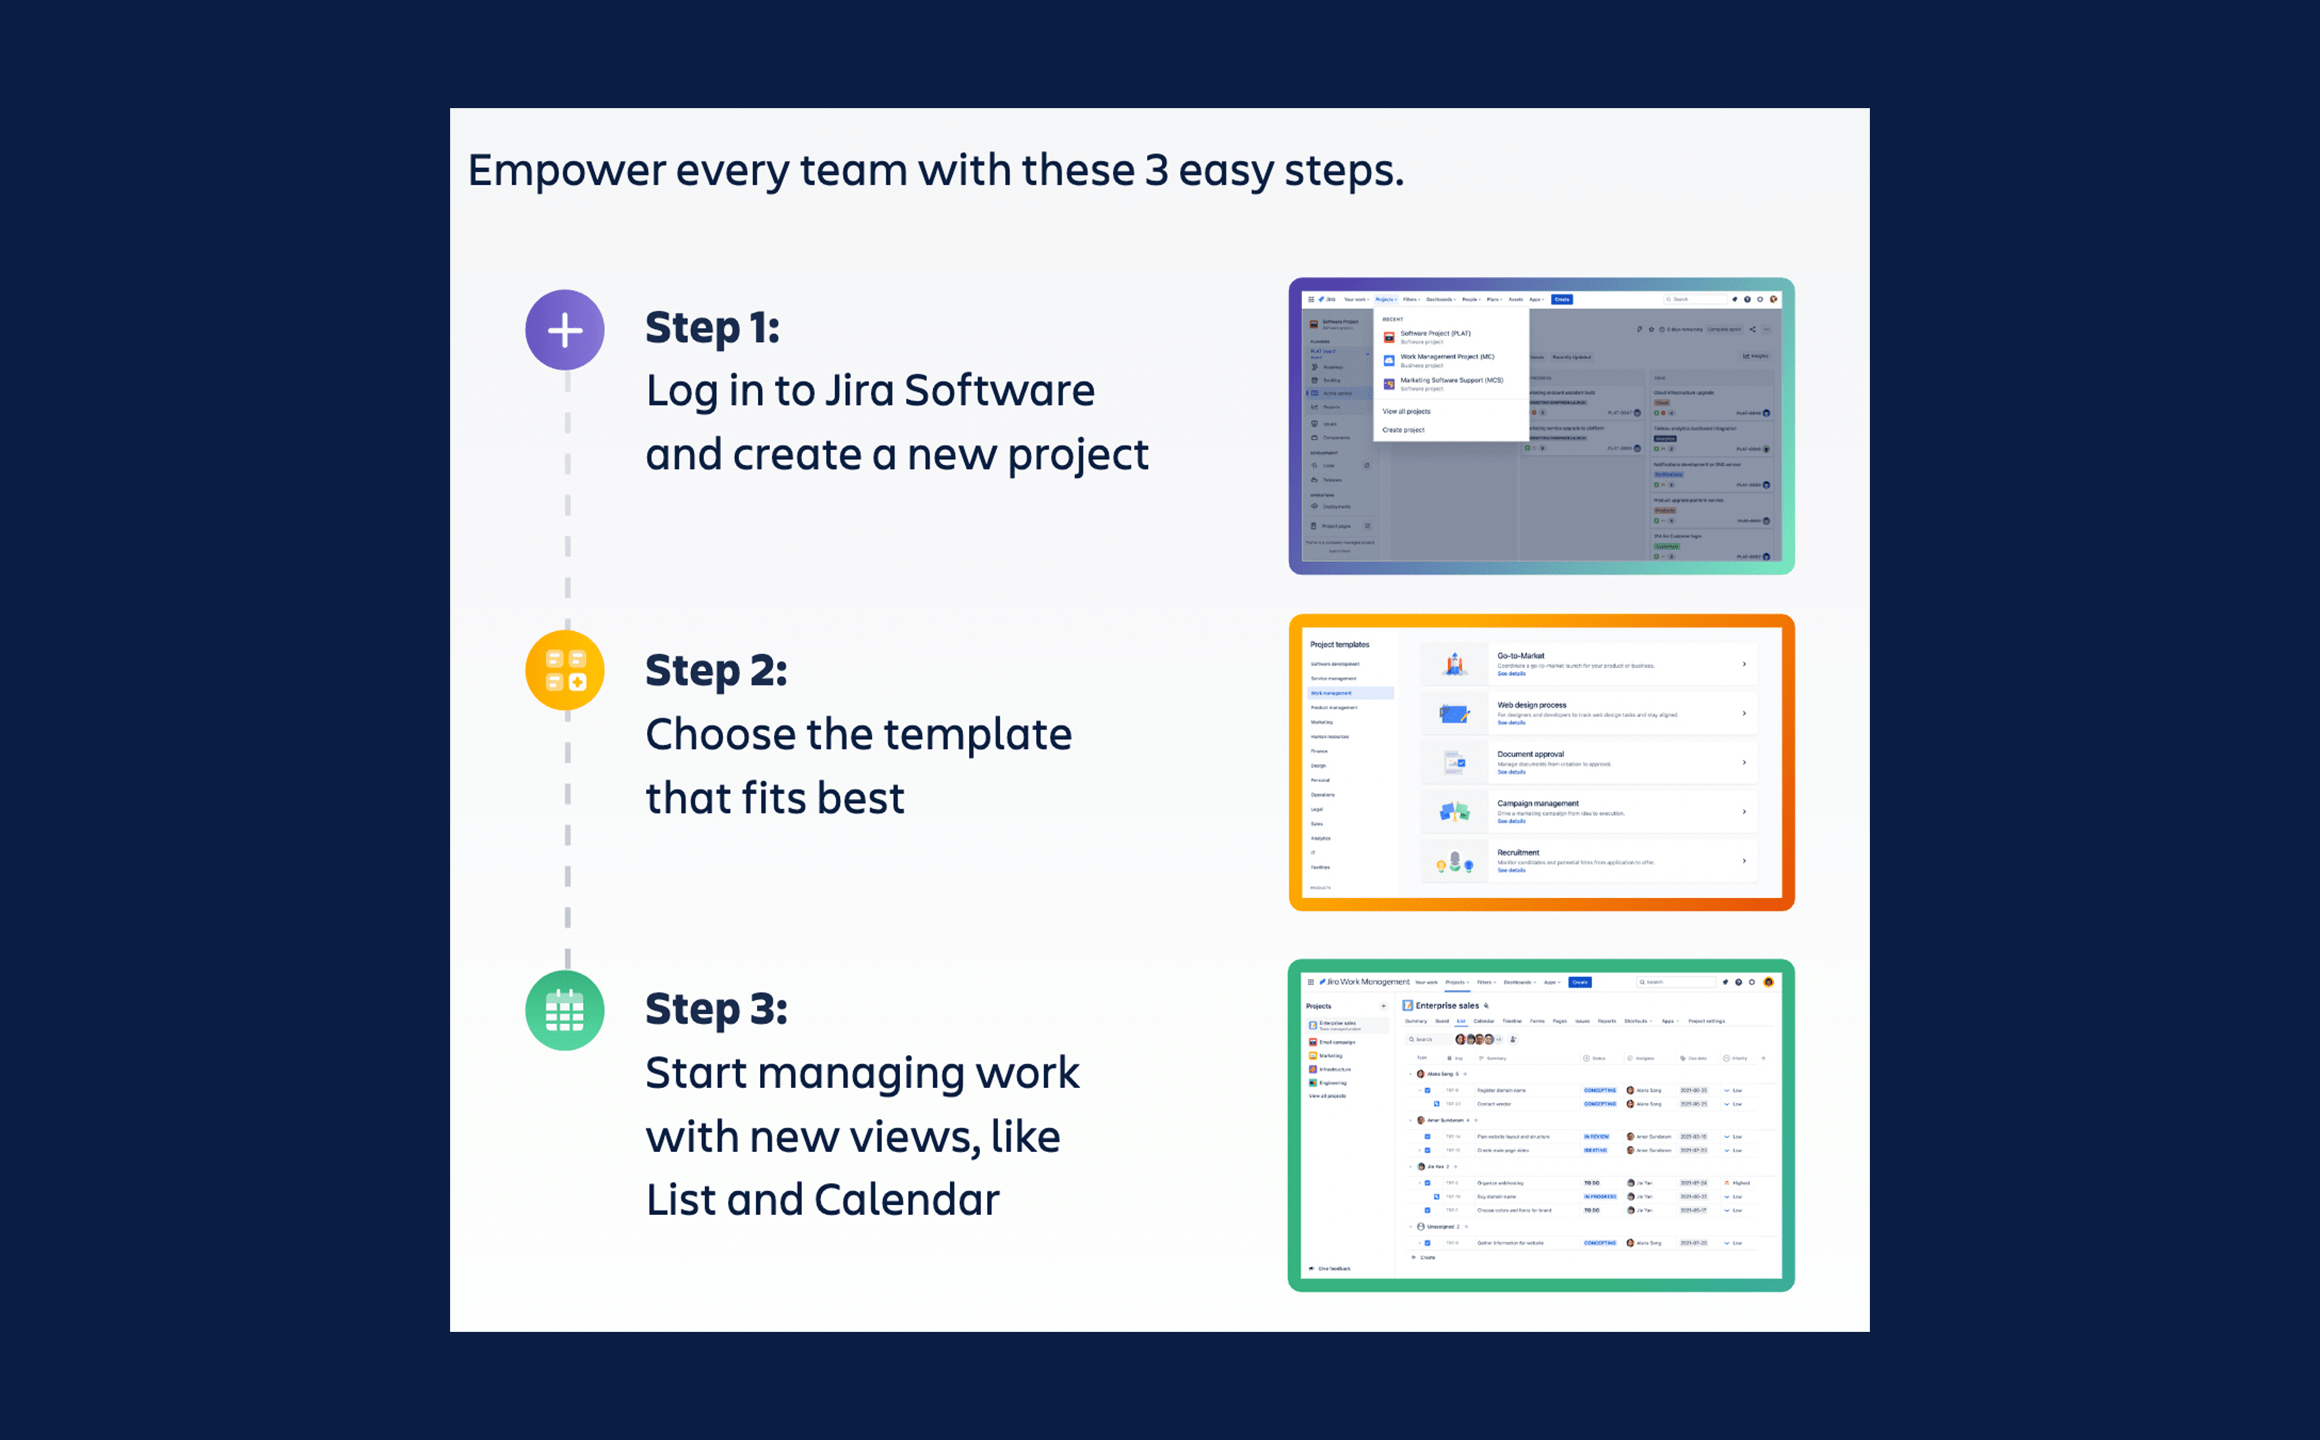 Instructions for getting started with Jira Work Management